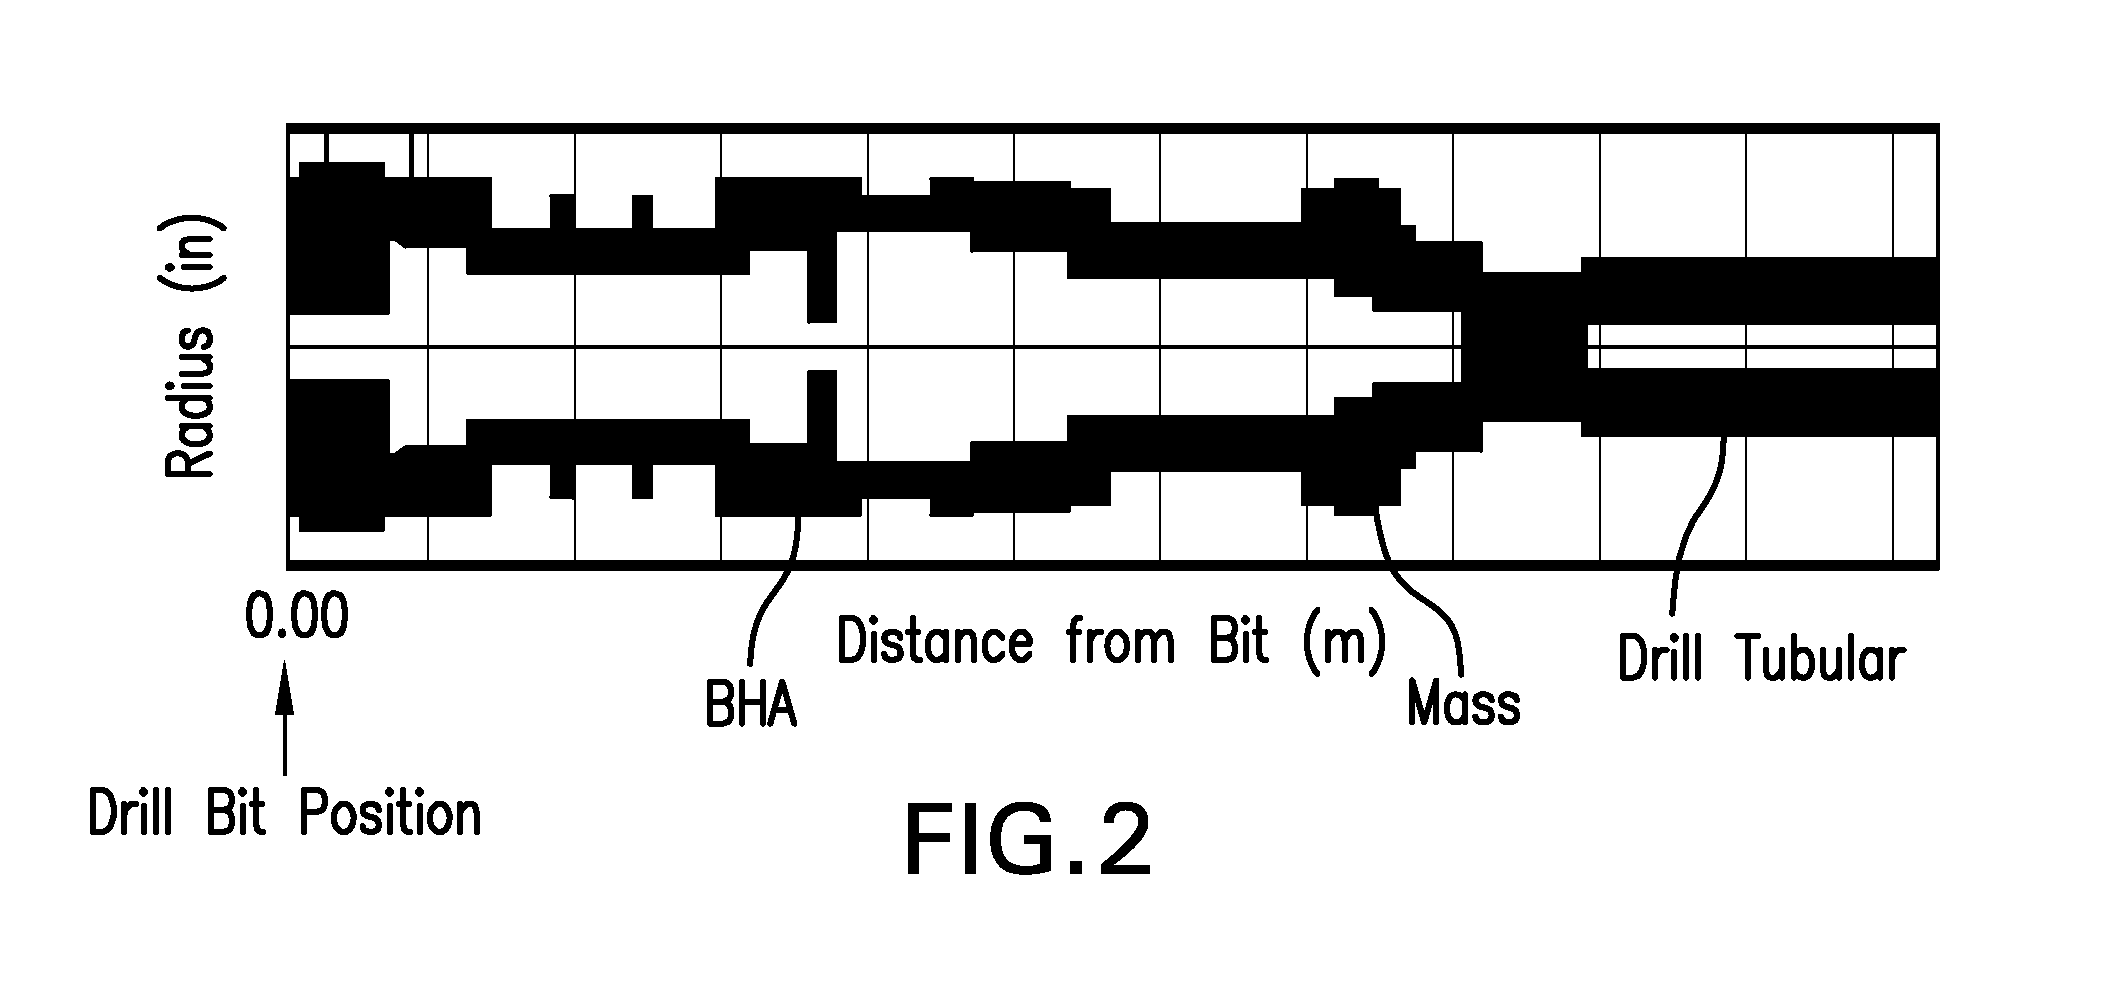 Method to mitigate bit induced vibrations by intentionally modifying mode shapes of drill strings by mass or stiffness changes